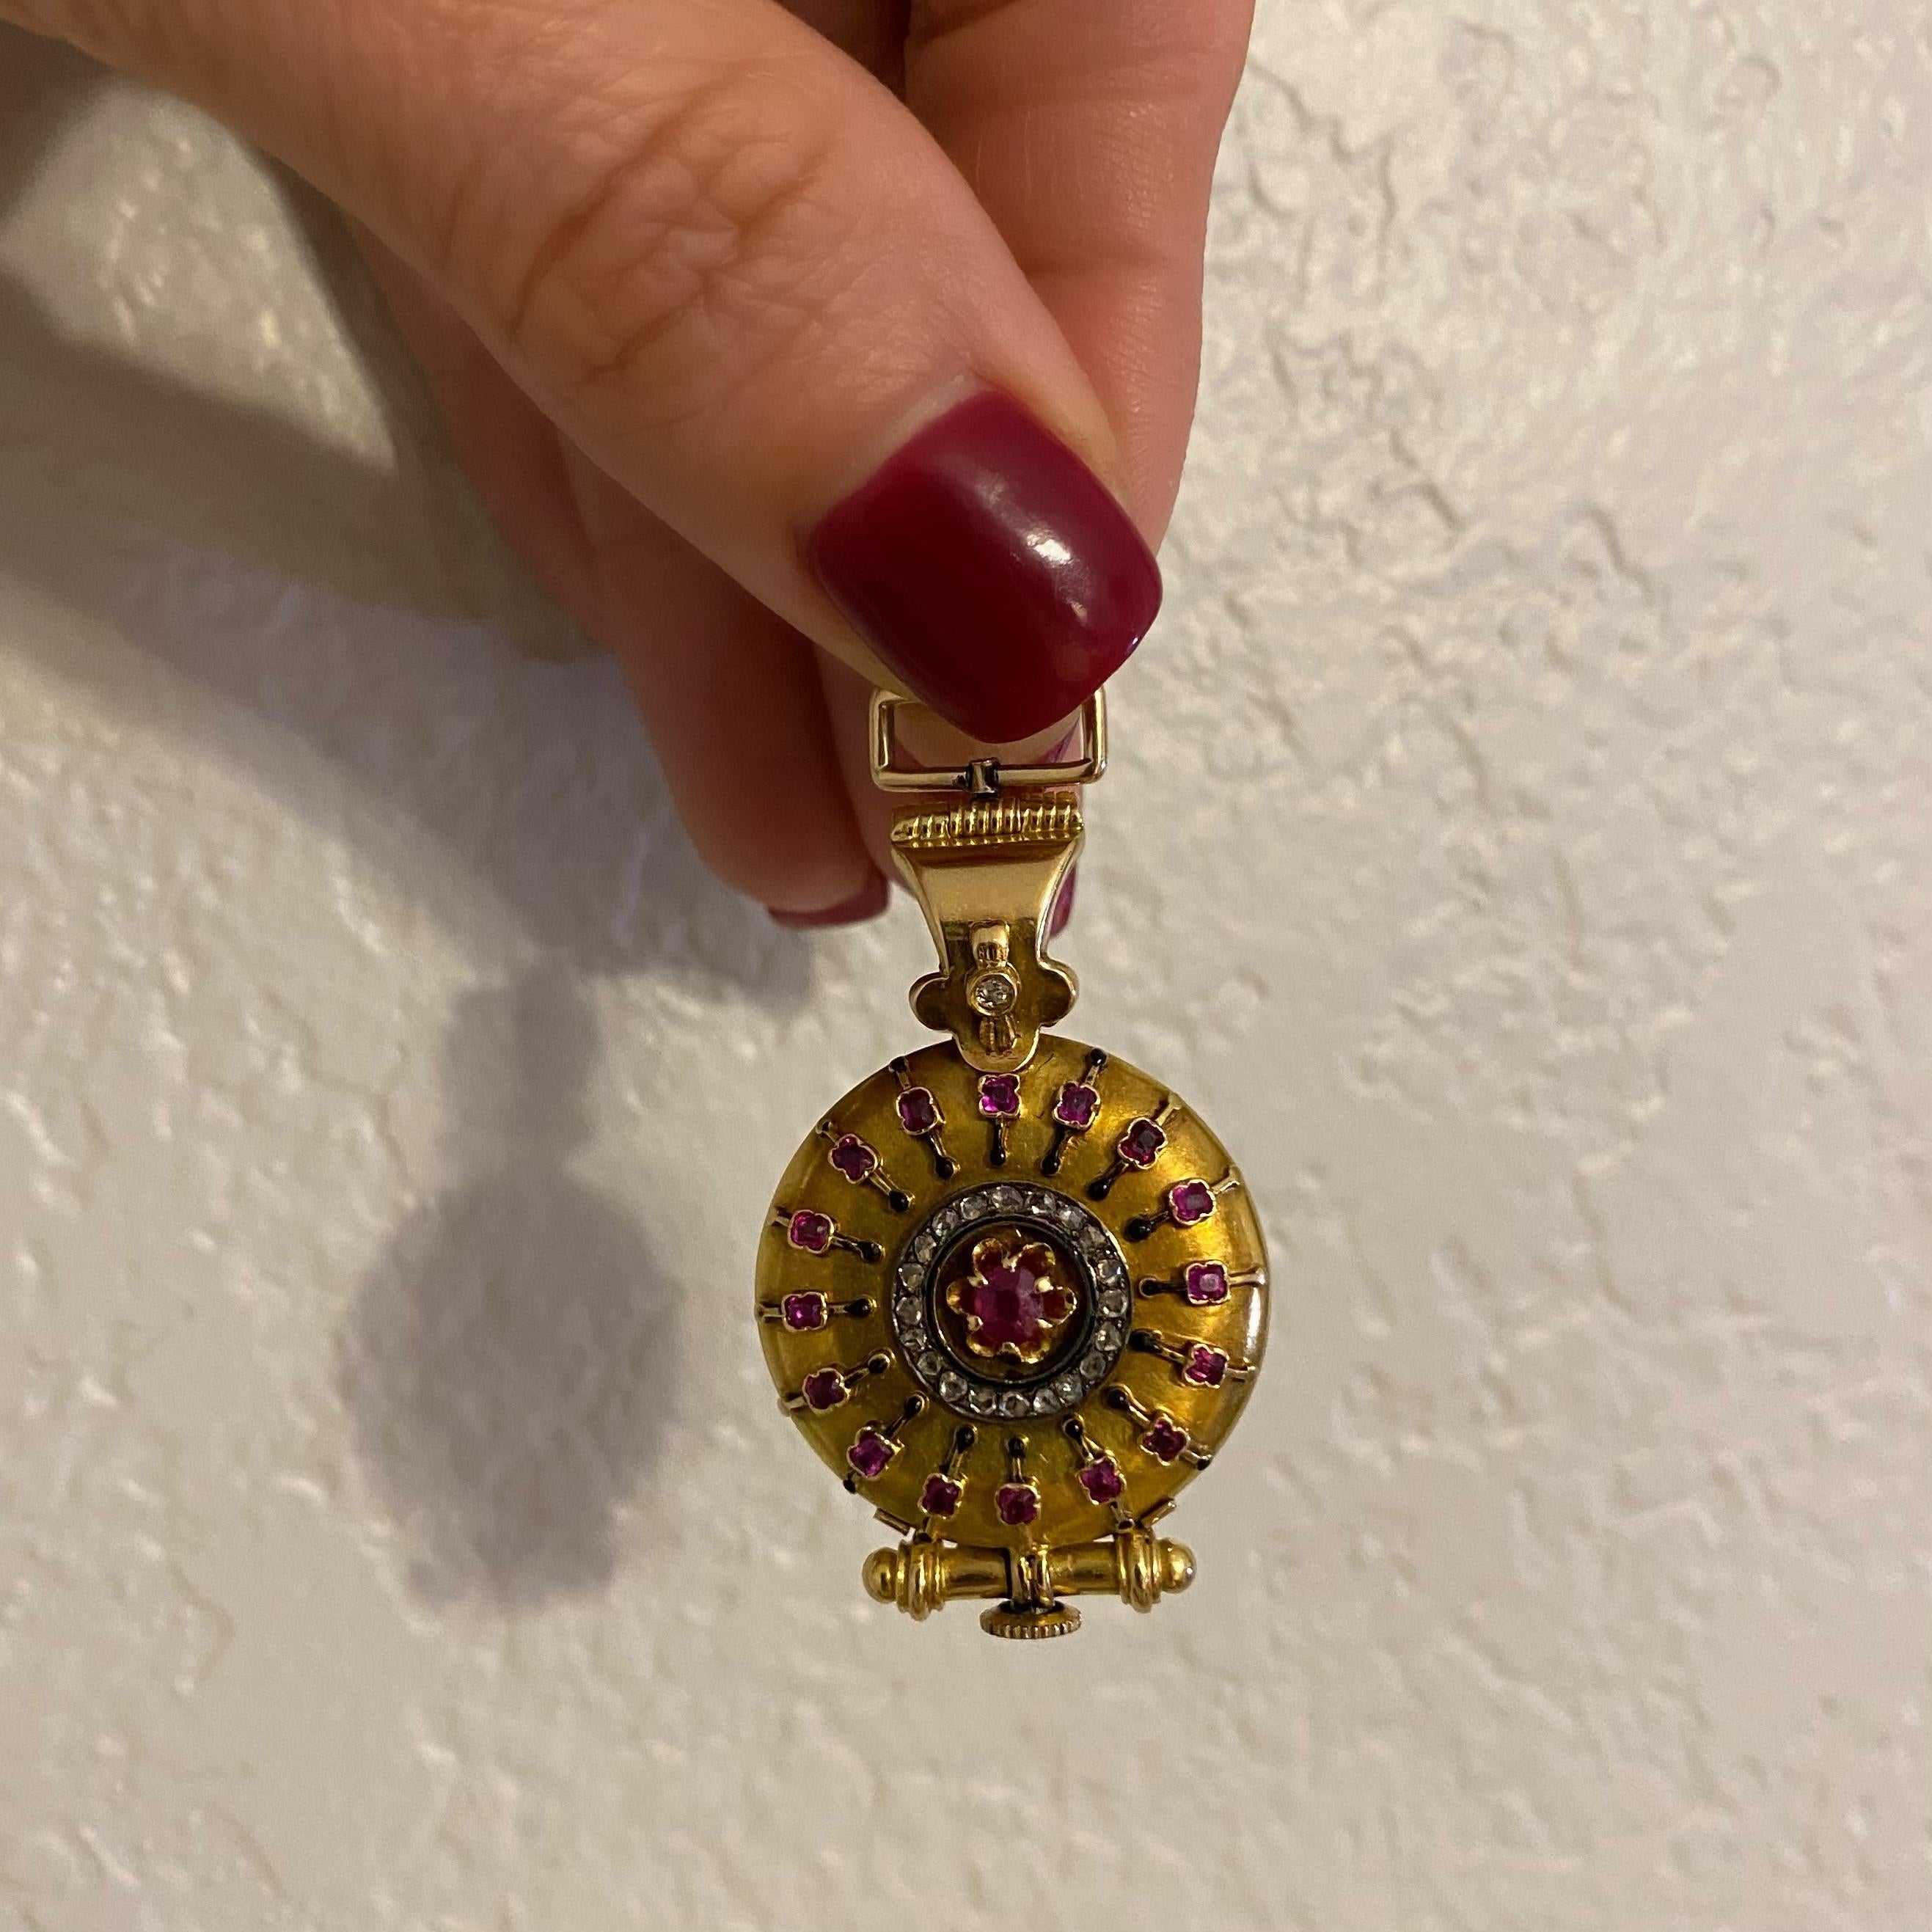 Beautiful Mid-Century Diamonds Rubies and Enamel Gold Watch Fob Pendant set with with 24 old European cut Diamonds. Hand crafted in 14K yellow Gold. Measuring 1.04